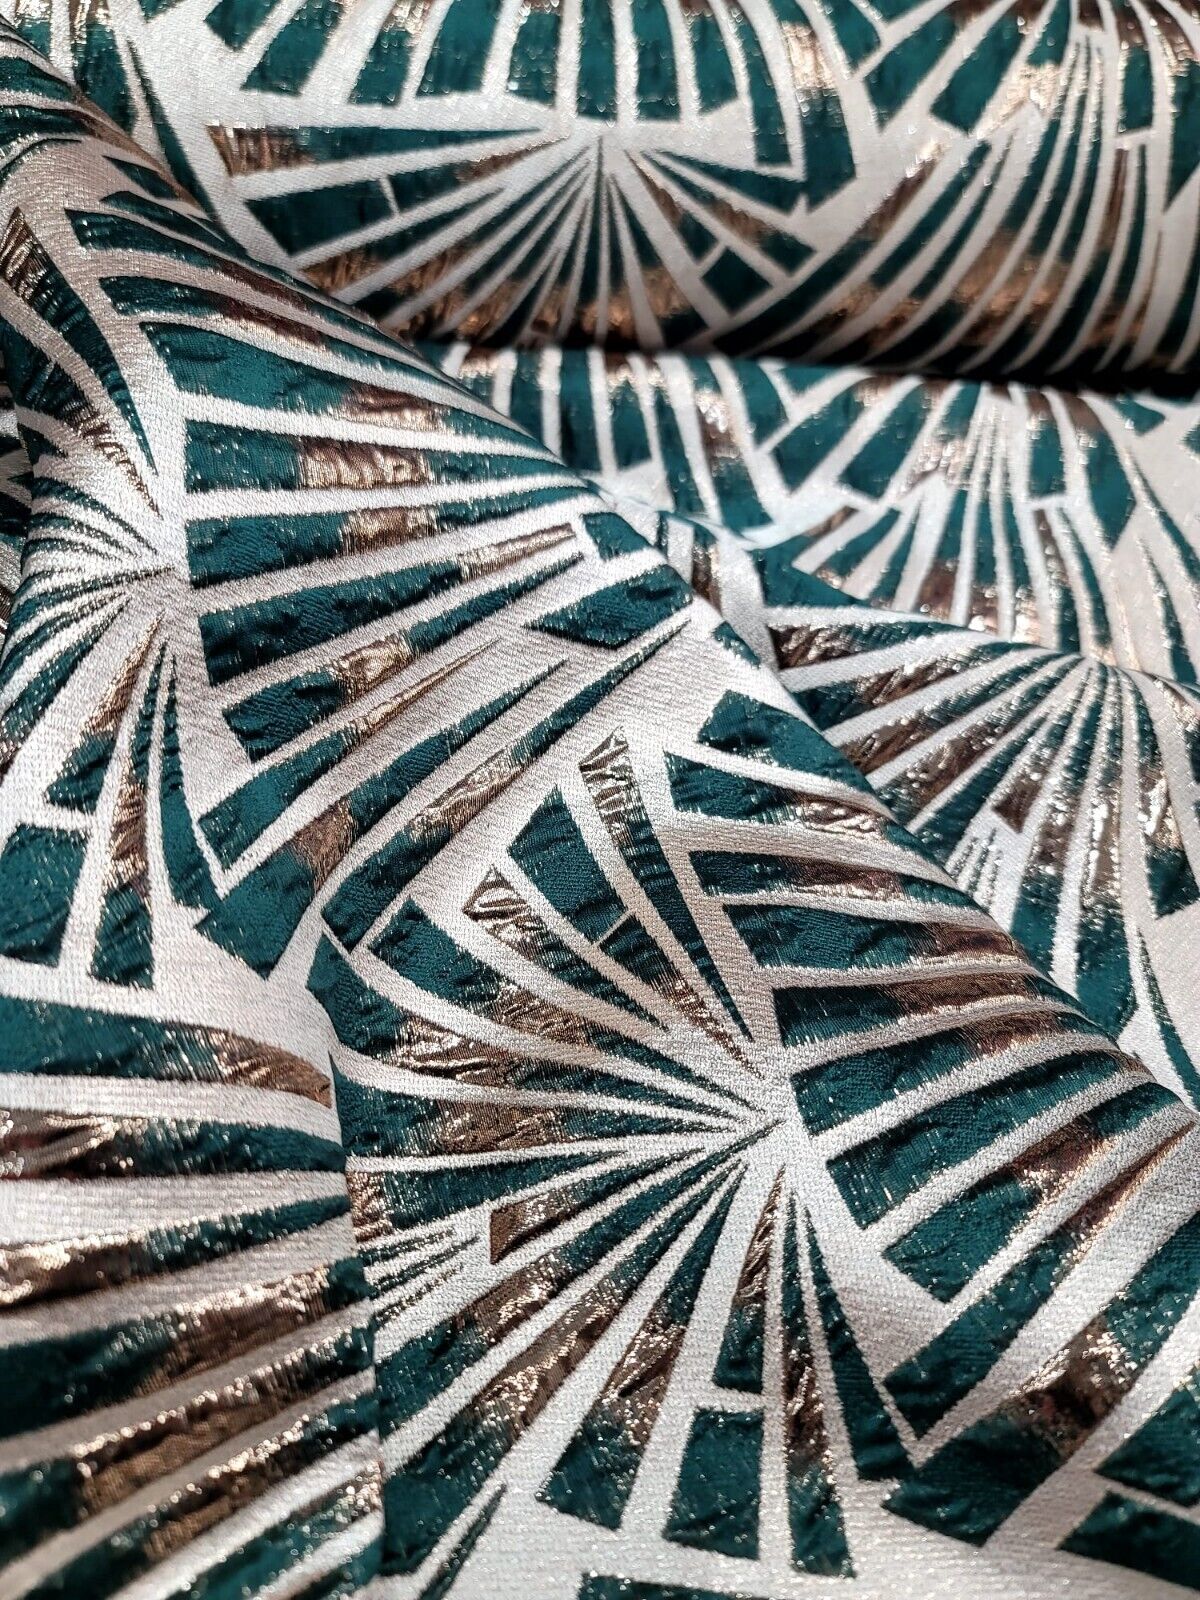 "Geometric Pattern Metallic Brocade Fabric by the Yard - Ideal for Elegant Creations - Available in Multiple Stunning Color Combinations